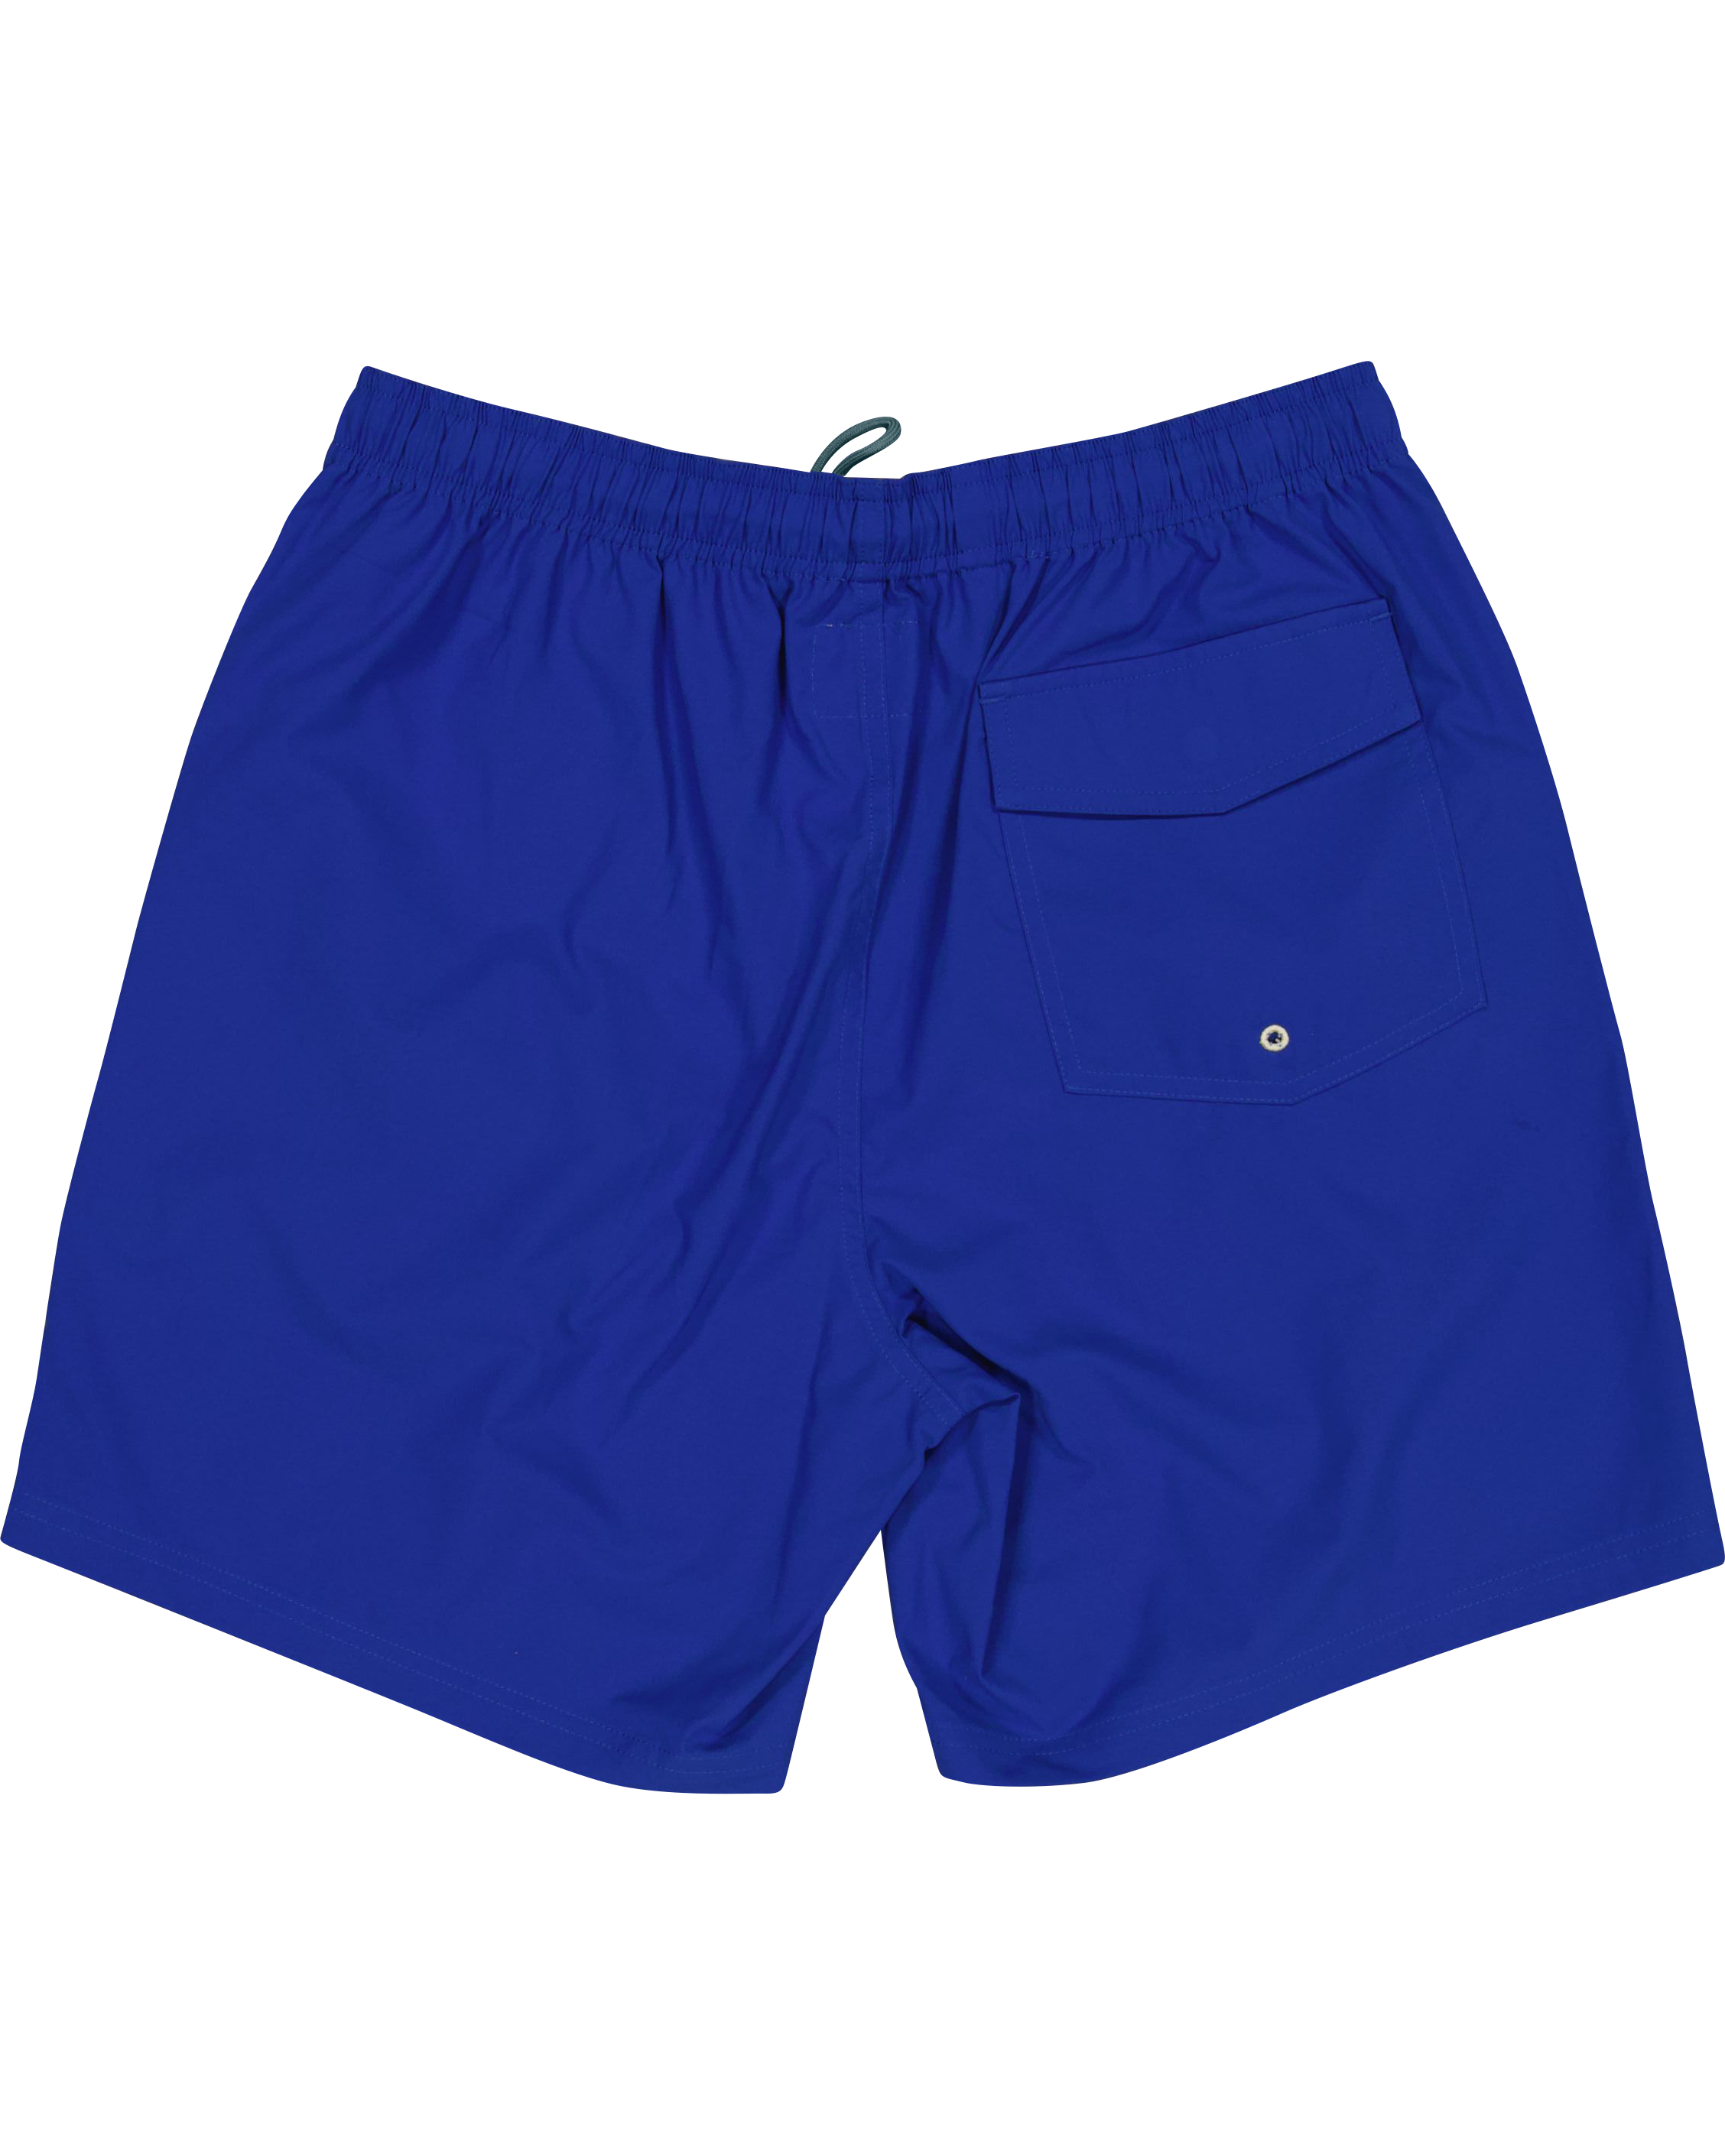 Just Another Fisherman Coastal Cast Volley Shorts - Blue